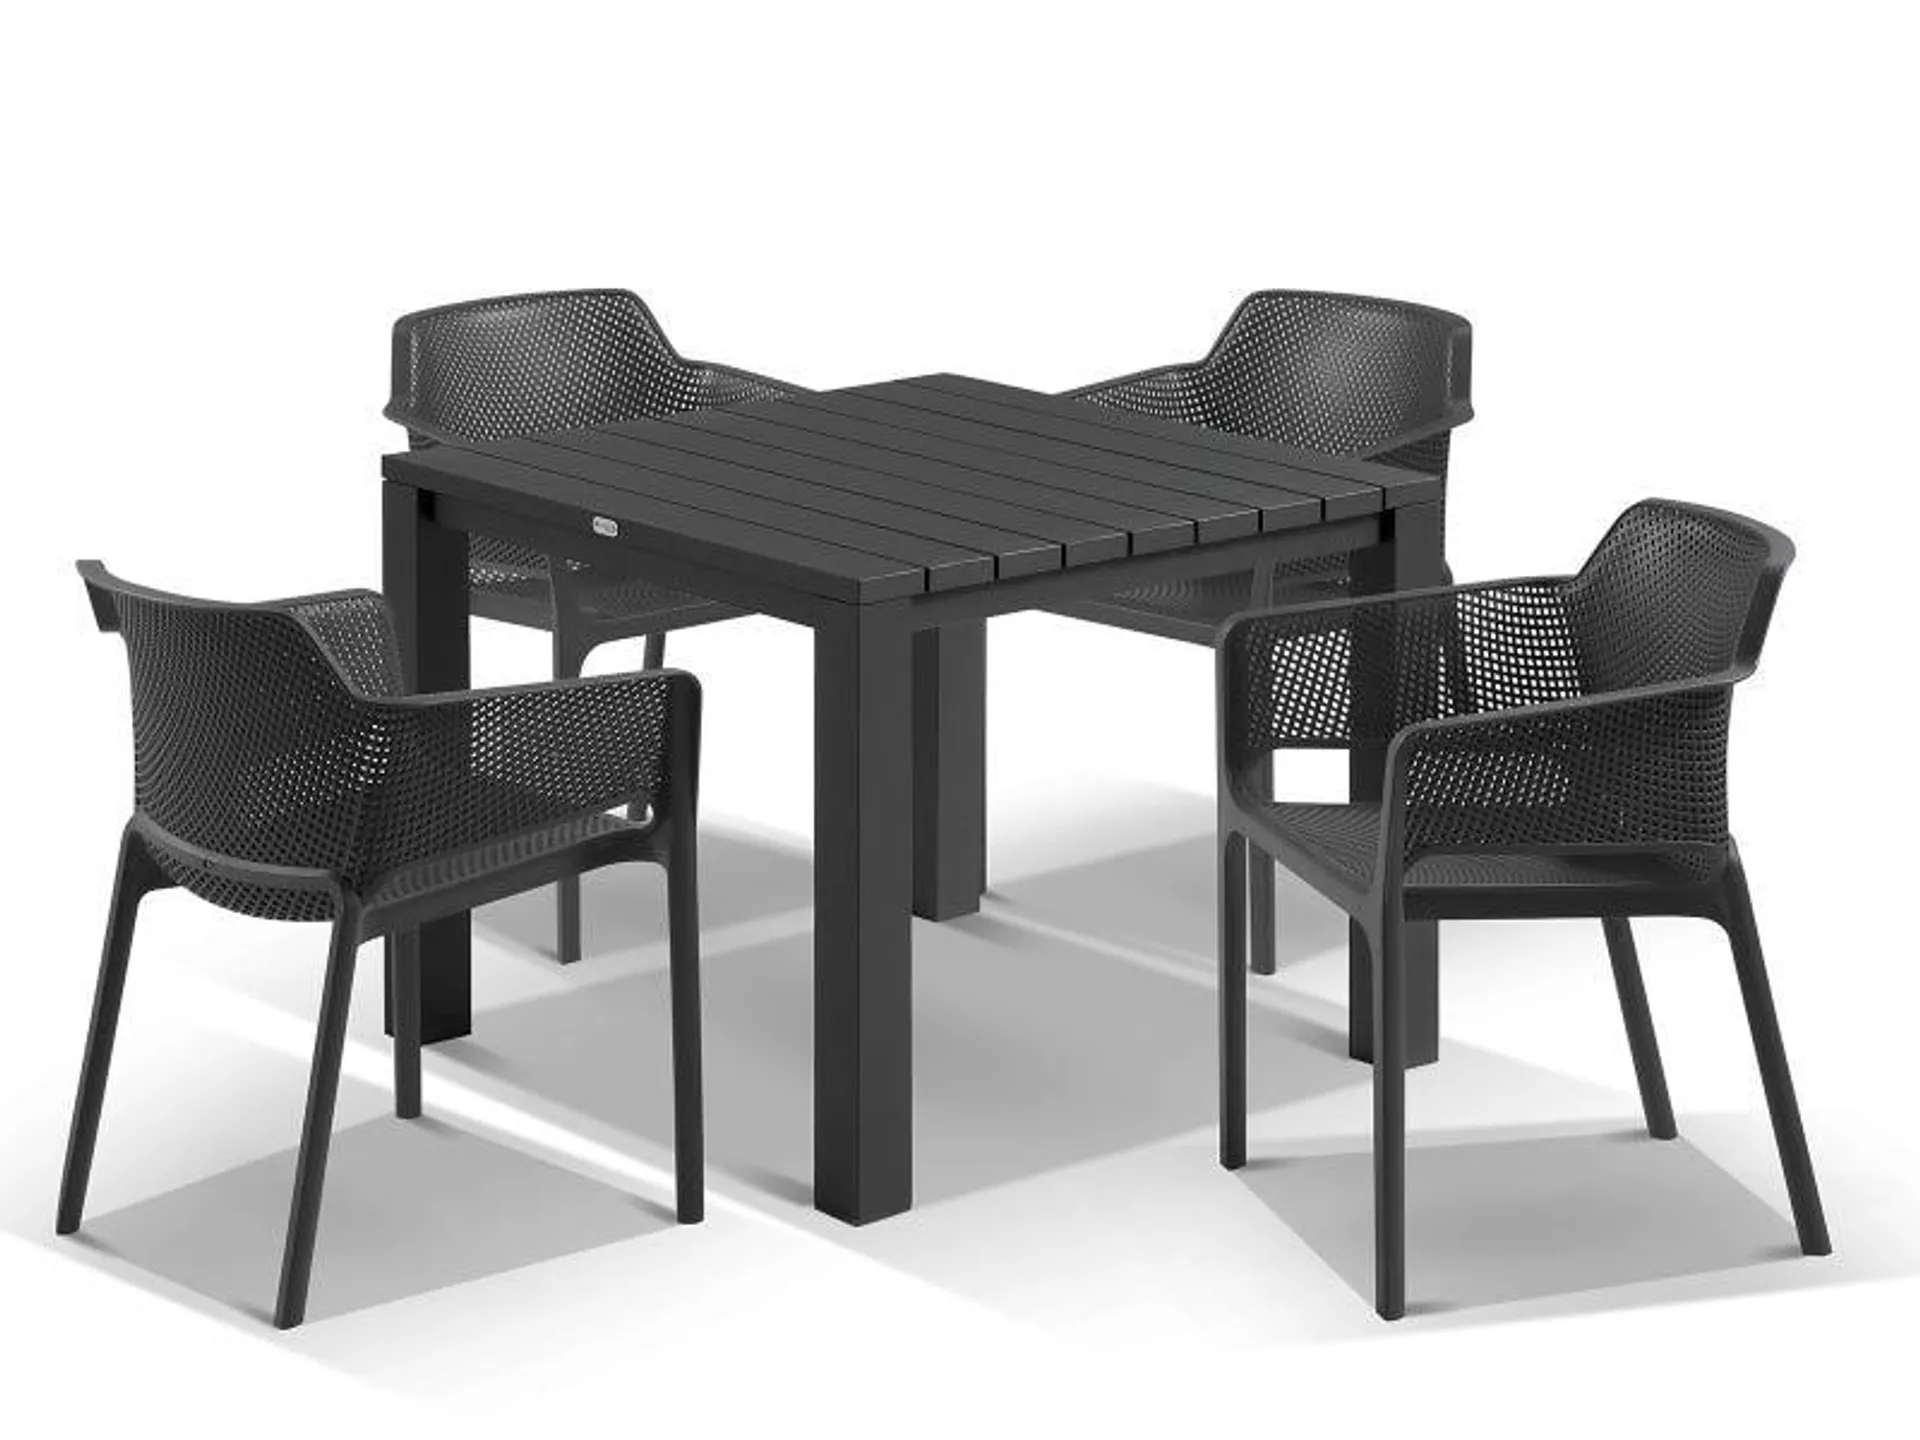 Adele Table with Bailey Chairs 5pc Outdoor Dining Setting